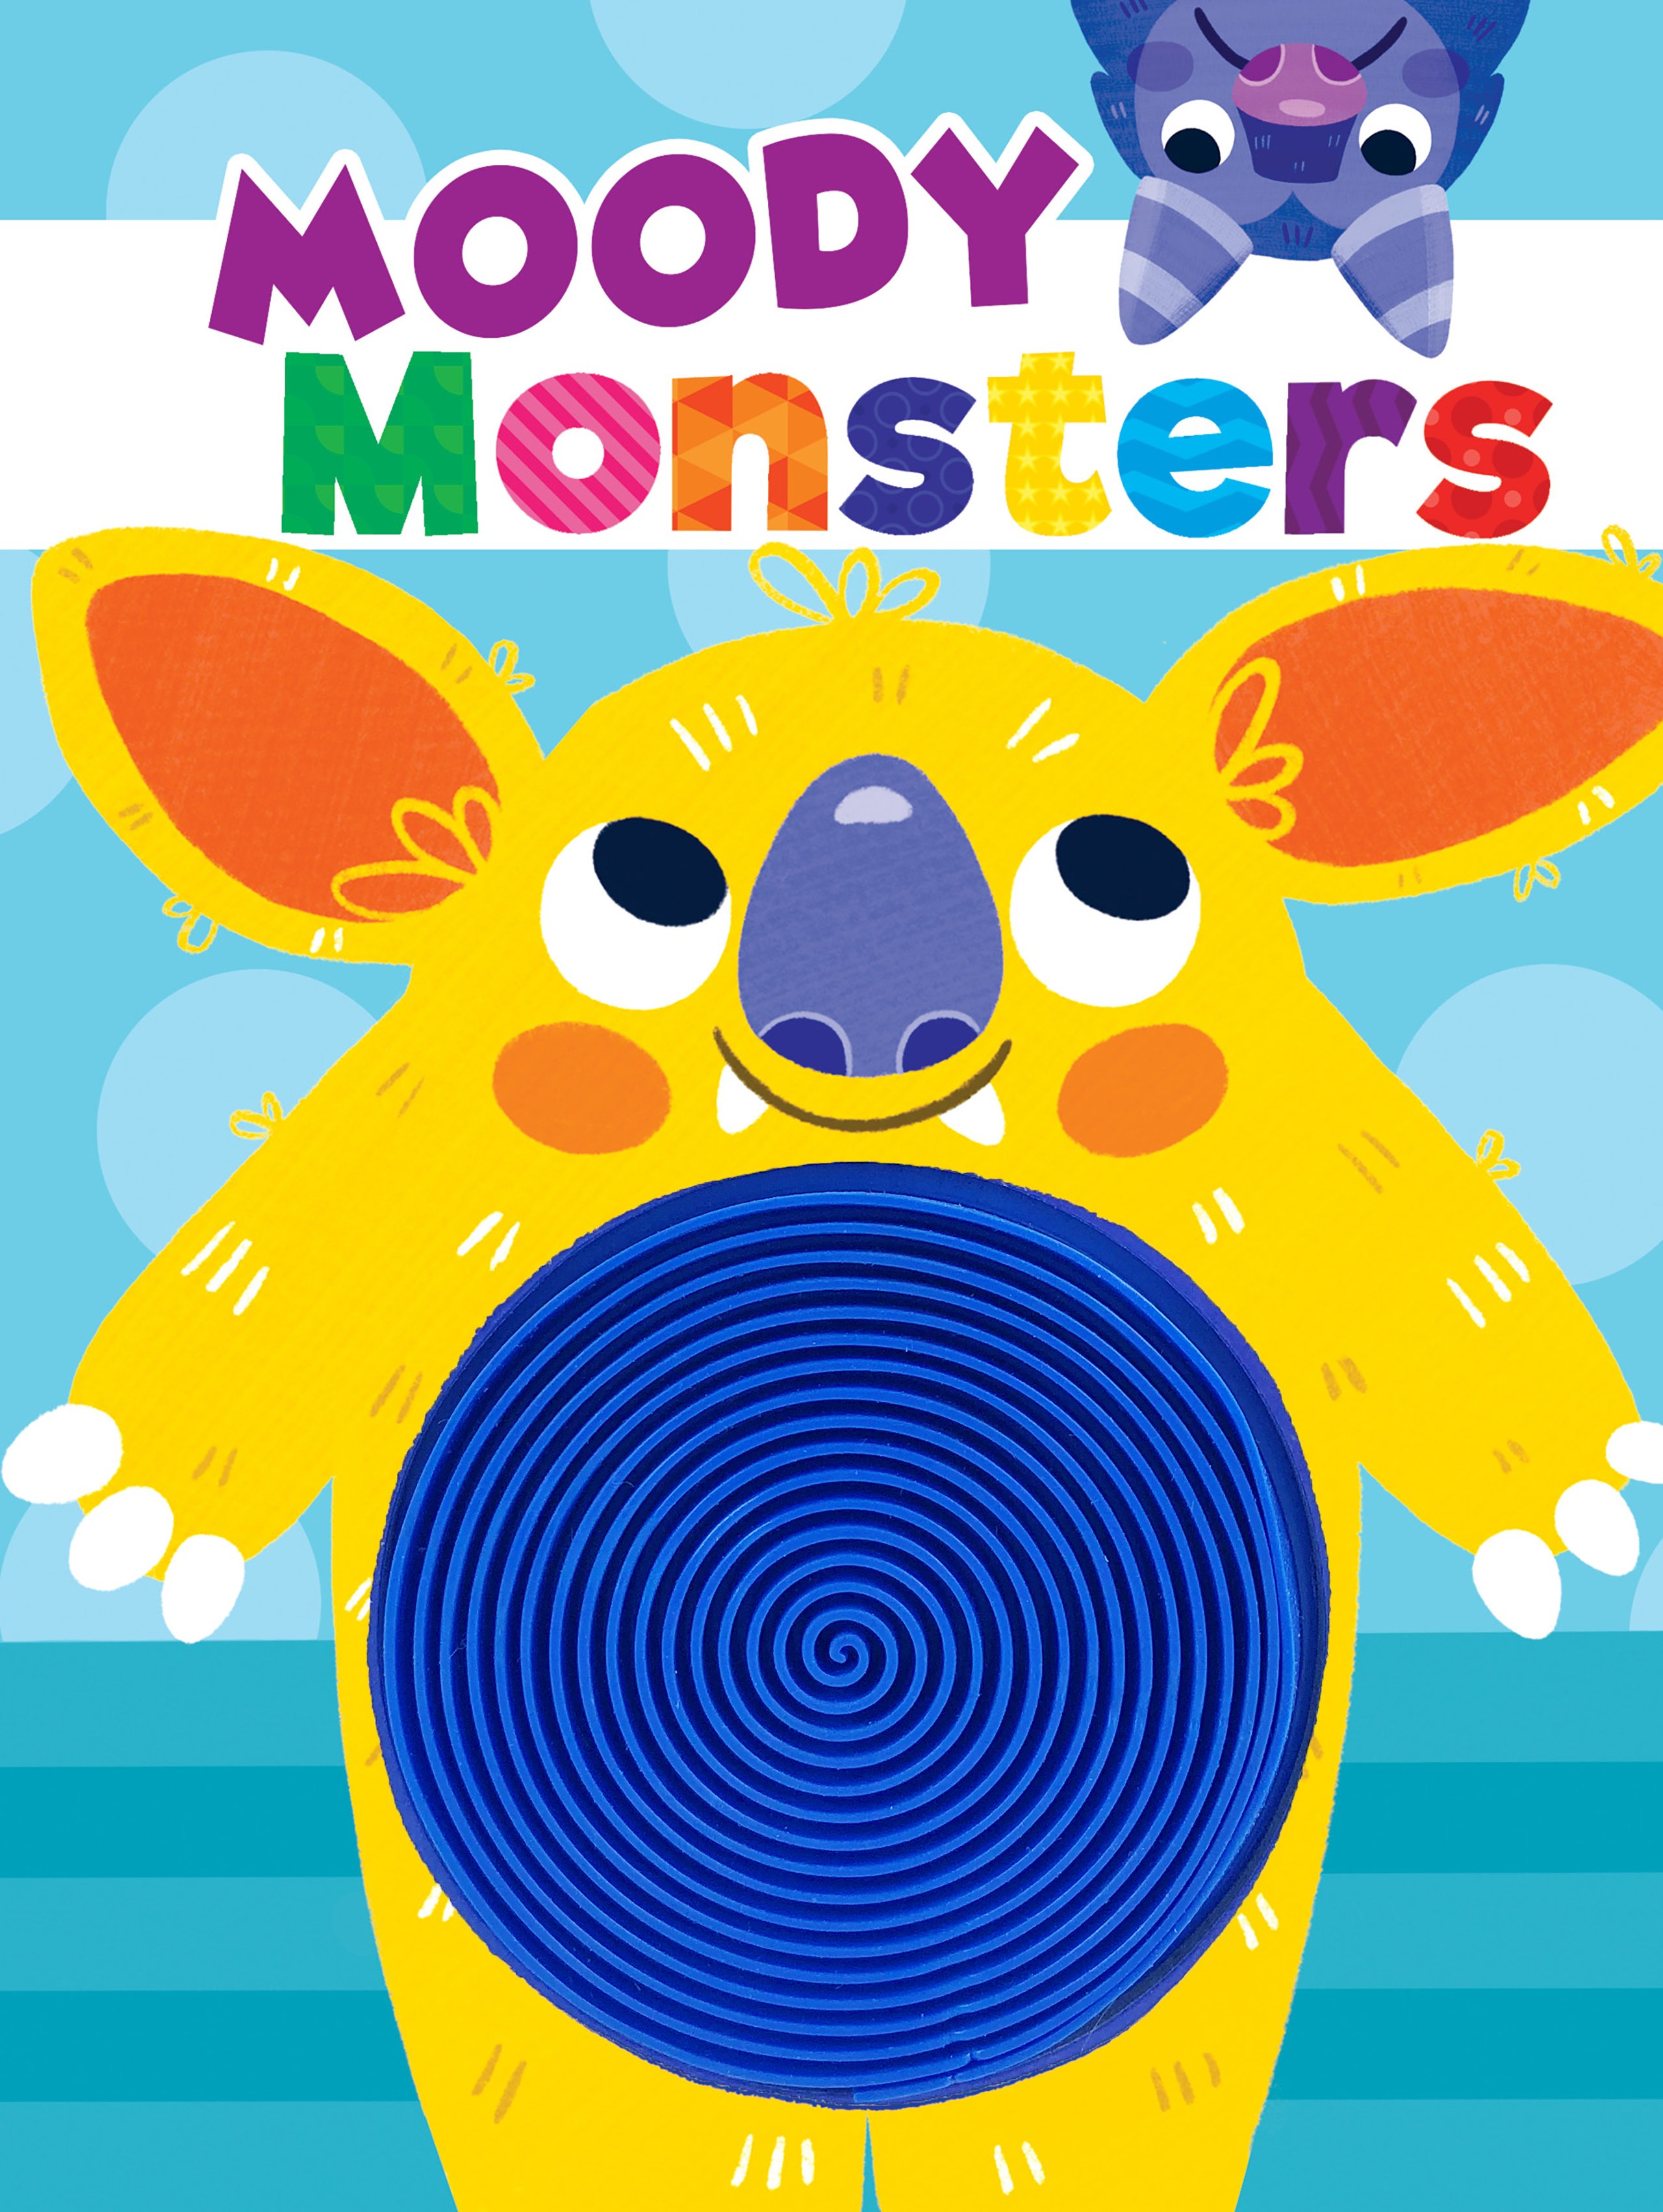 image of Book Cover "Moody Monsters" featuring a cartoon image of a cute yellow monster with a big blue circle on its stomach. 